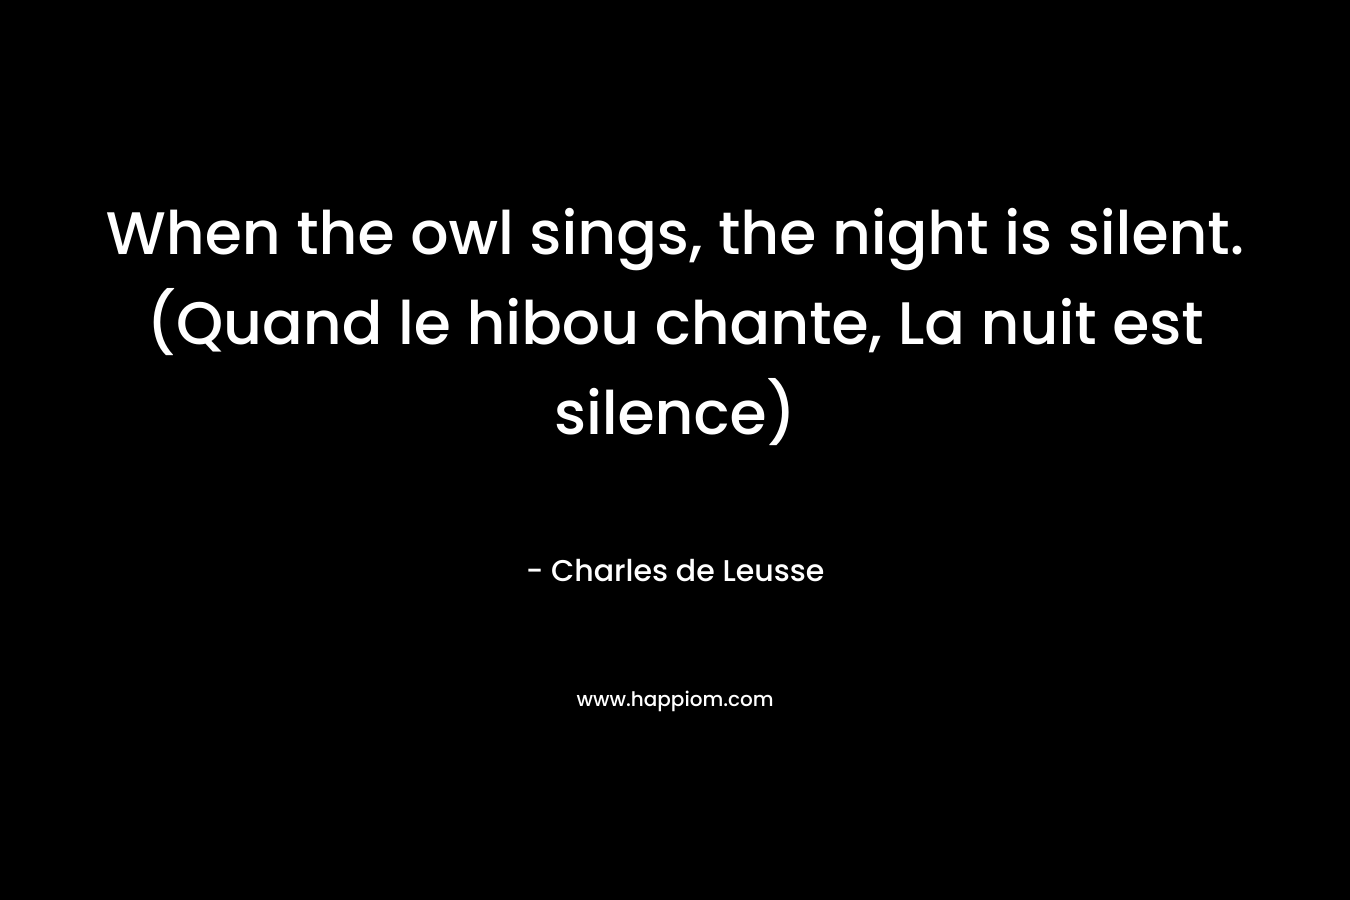 When the owl sings, the night is silent. (Quand le hibou chante, La nuit est silence)